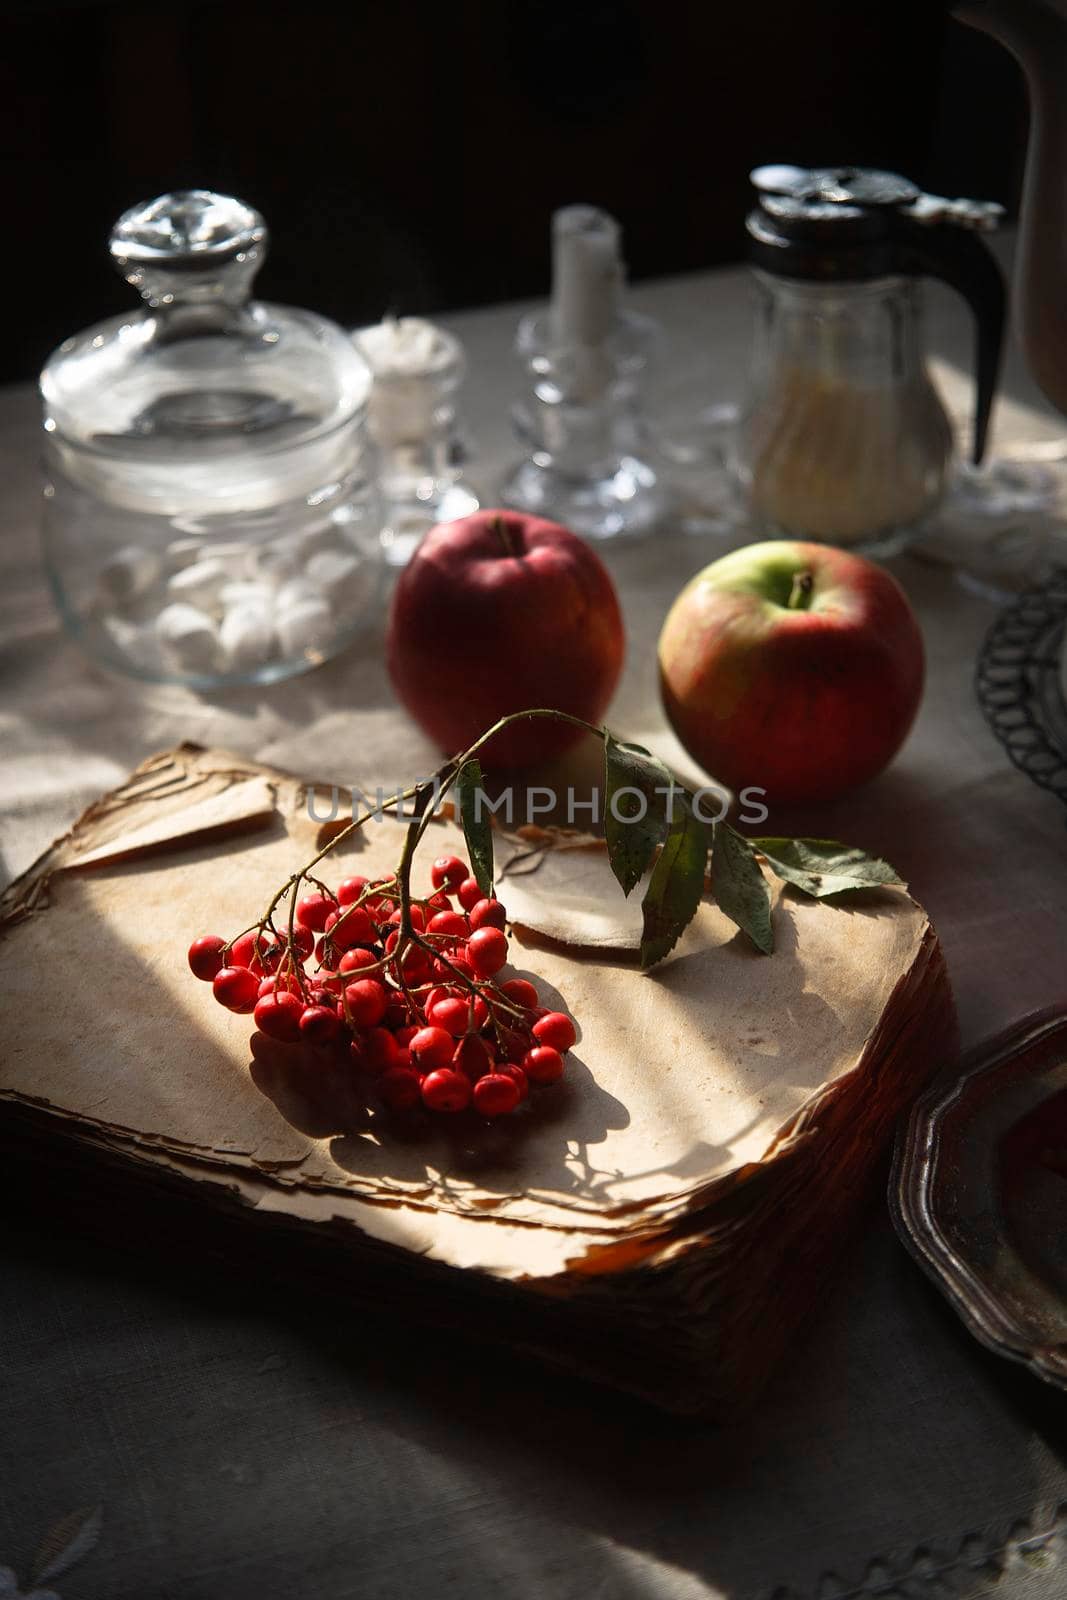 A bunch of red rowan lying on the old and scrubby book, two red apples and the other tableware for tea time on gray rustic table in the morning light, selective focus.